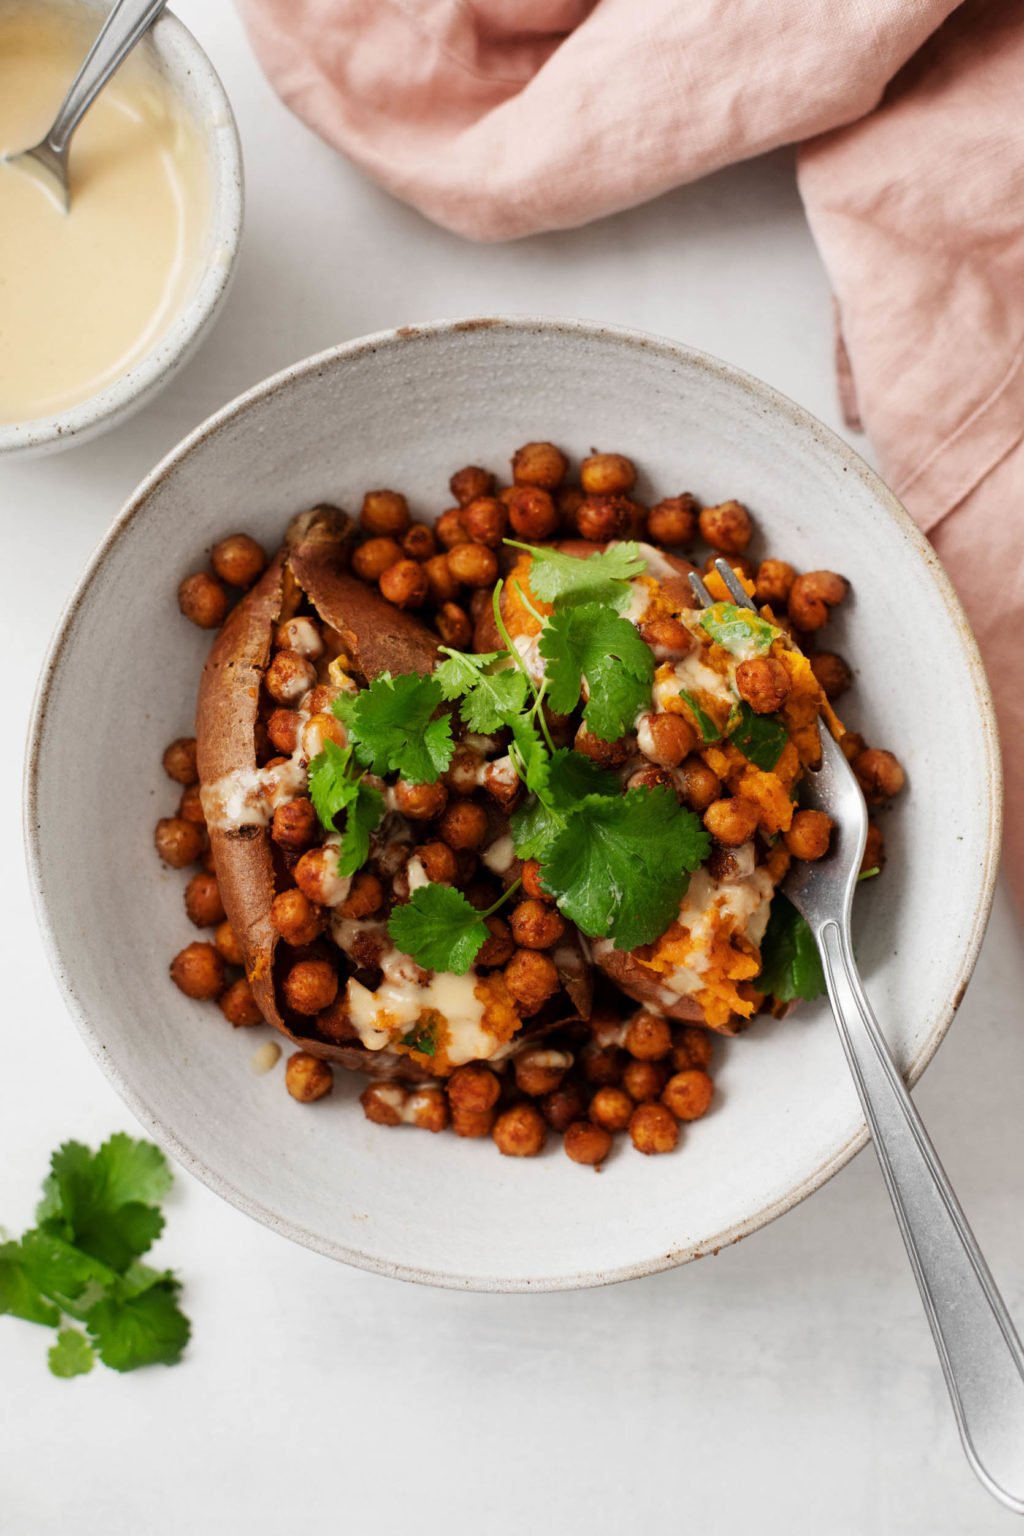 A bowl of stuffed sweet potatoes that have been topped with spice-roasted chickpeas, herbs, and a drizzle of tahini sauce.